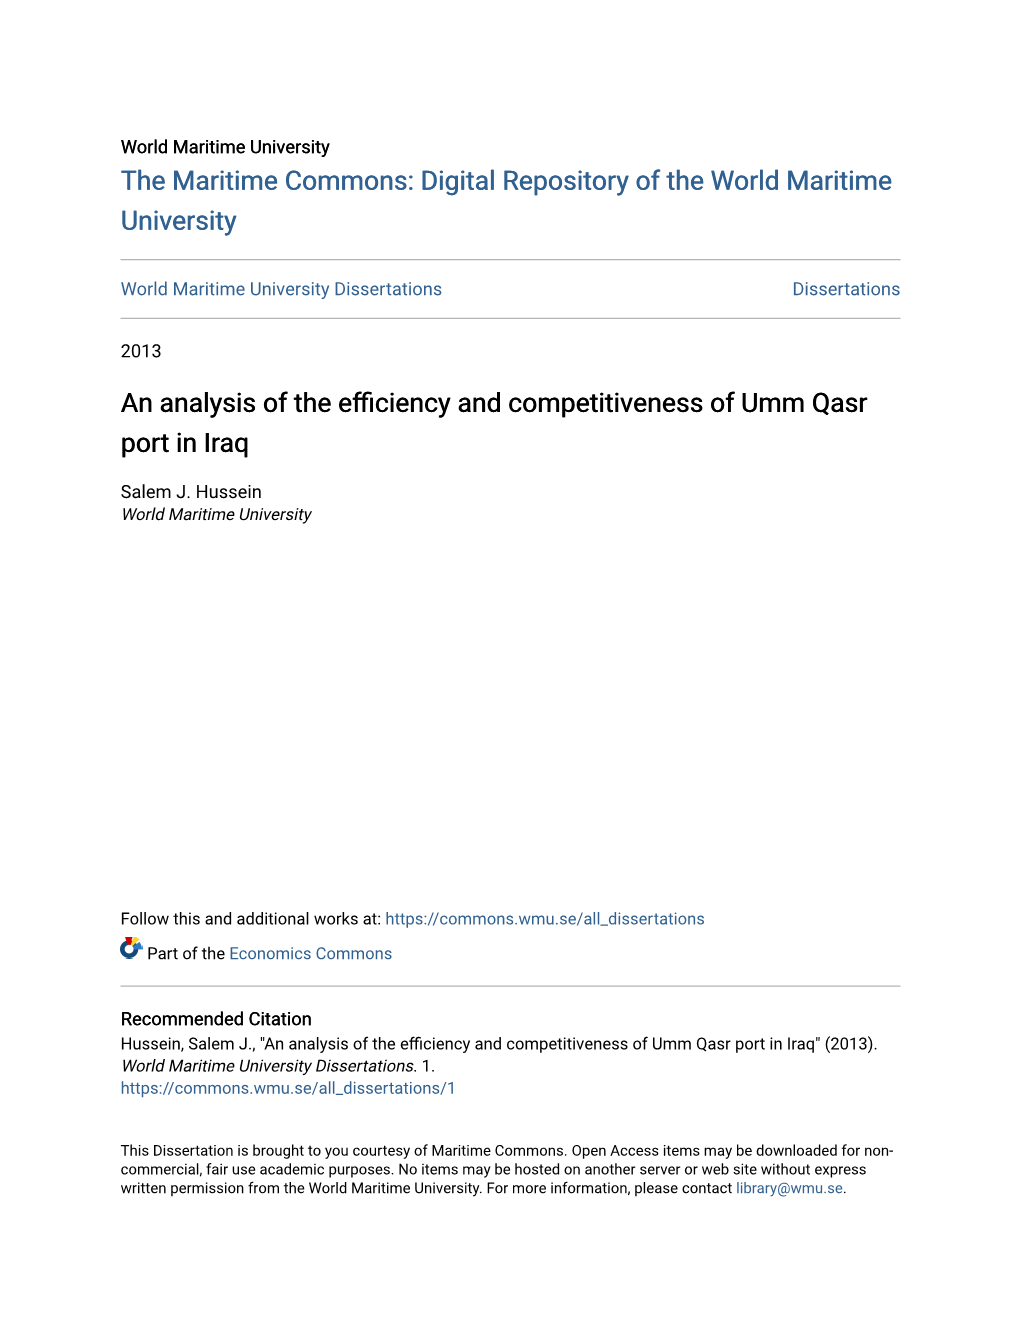 An Analysis of the Efficiency and Competitiveness of Umm Qasr Port in Iraq